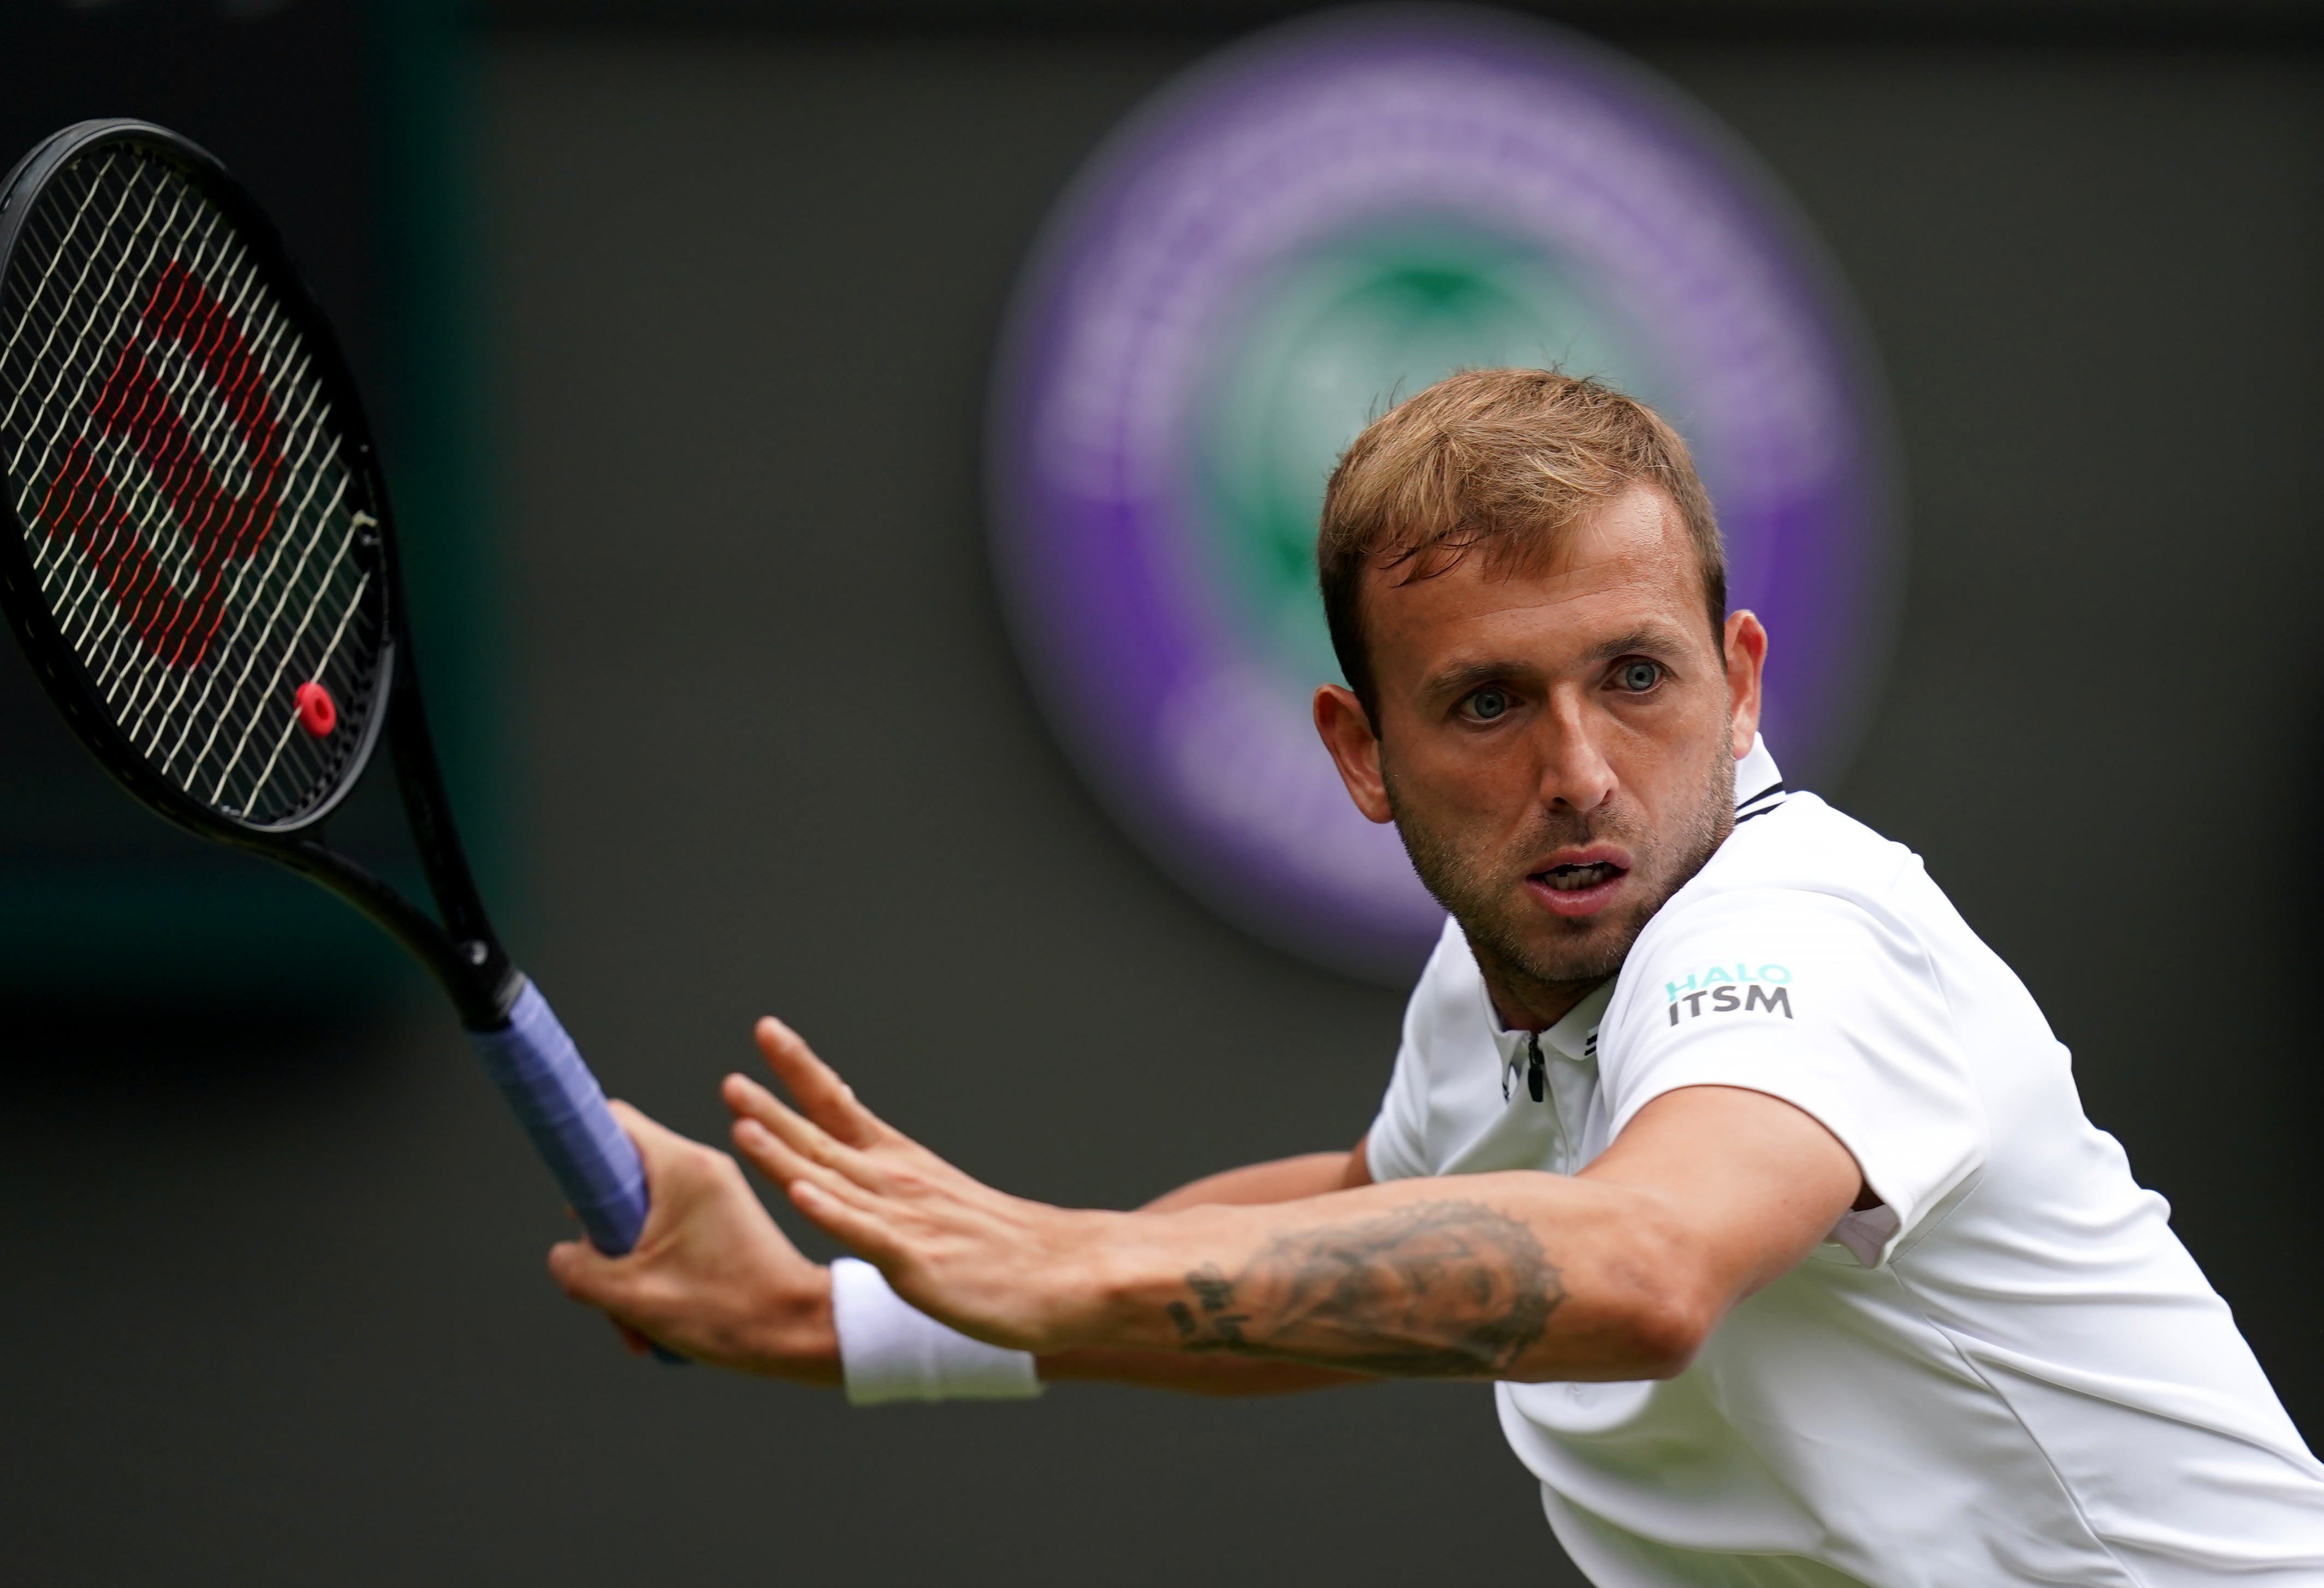 Dan Evans impressed on his way to the third round at Wimbledon